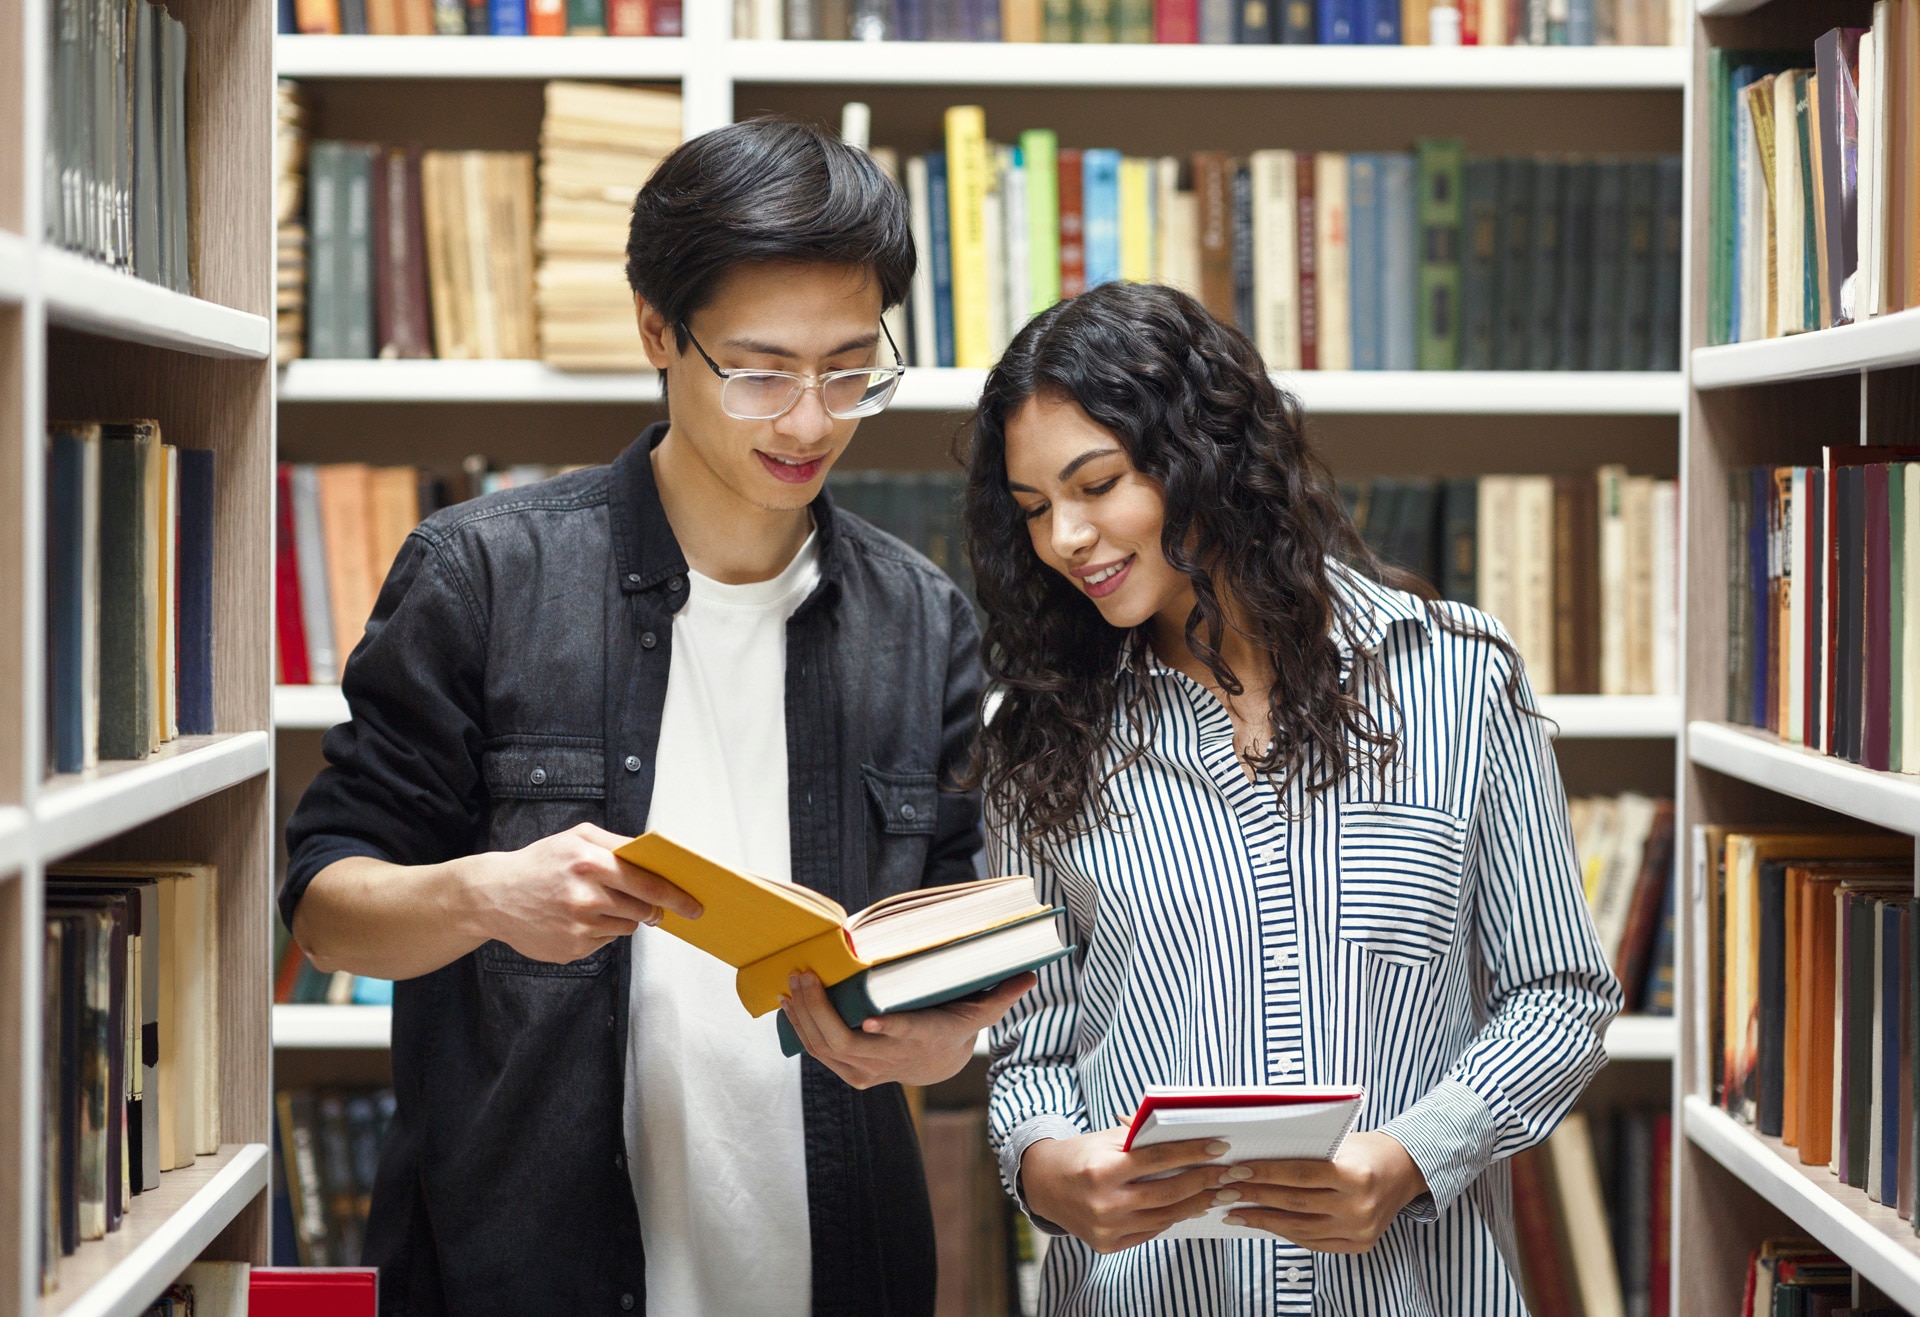 Student Exchange Program. Two multiracial students standing in university library, reading books, copyspace; Shutterstock ID 1646628298; purchase_order: -; job: -; client: -; other: -